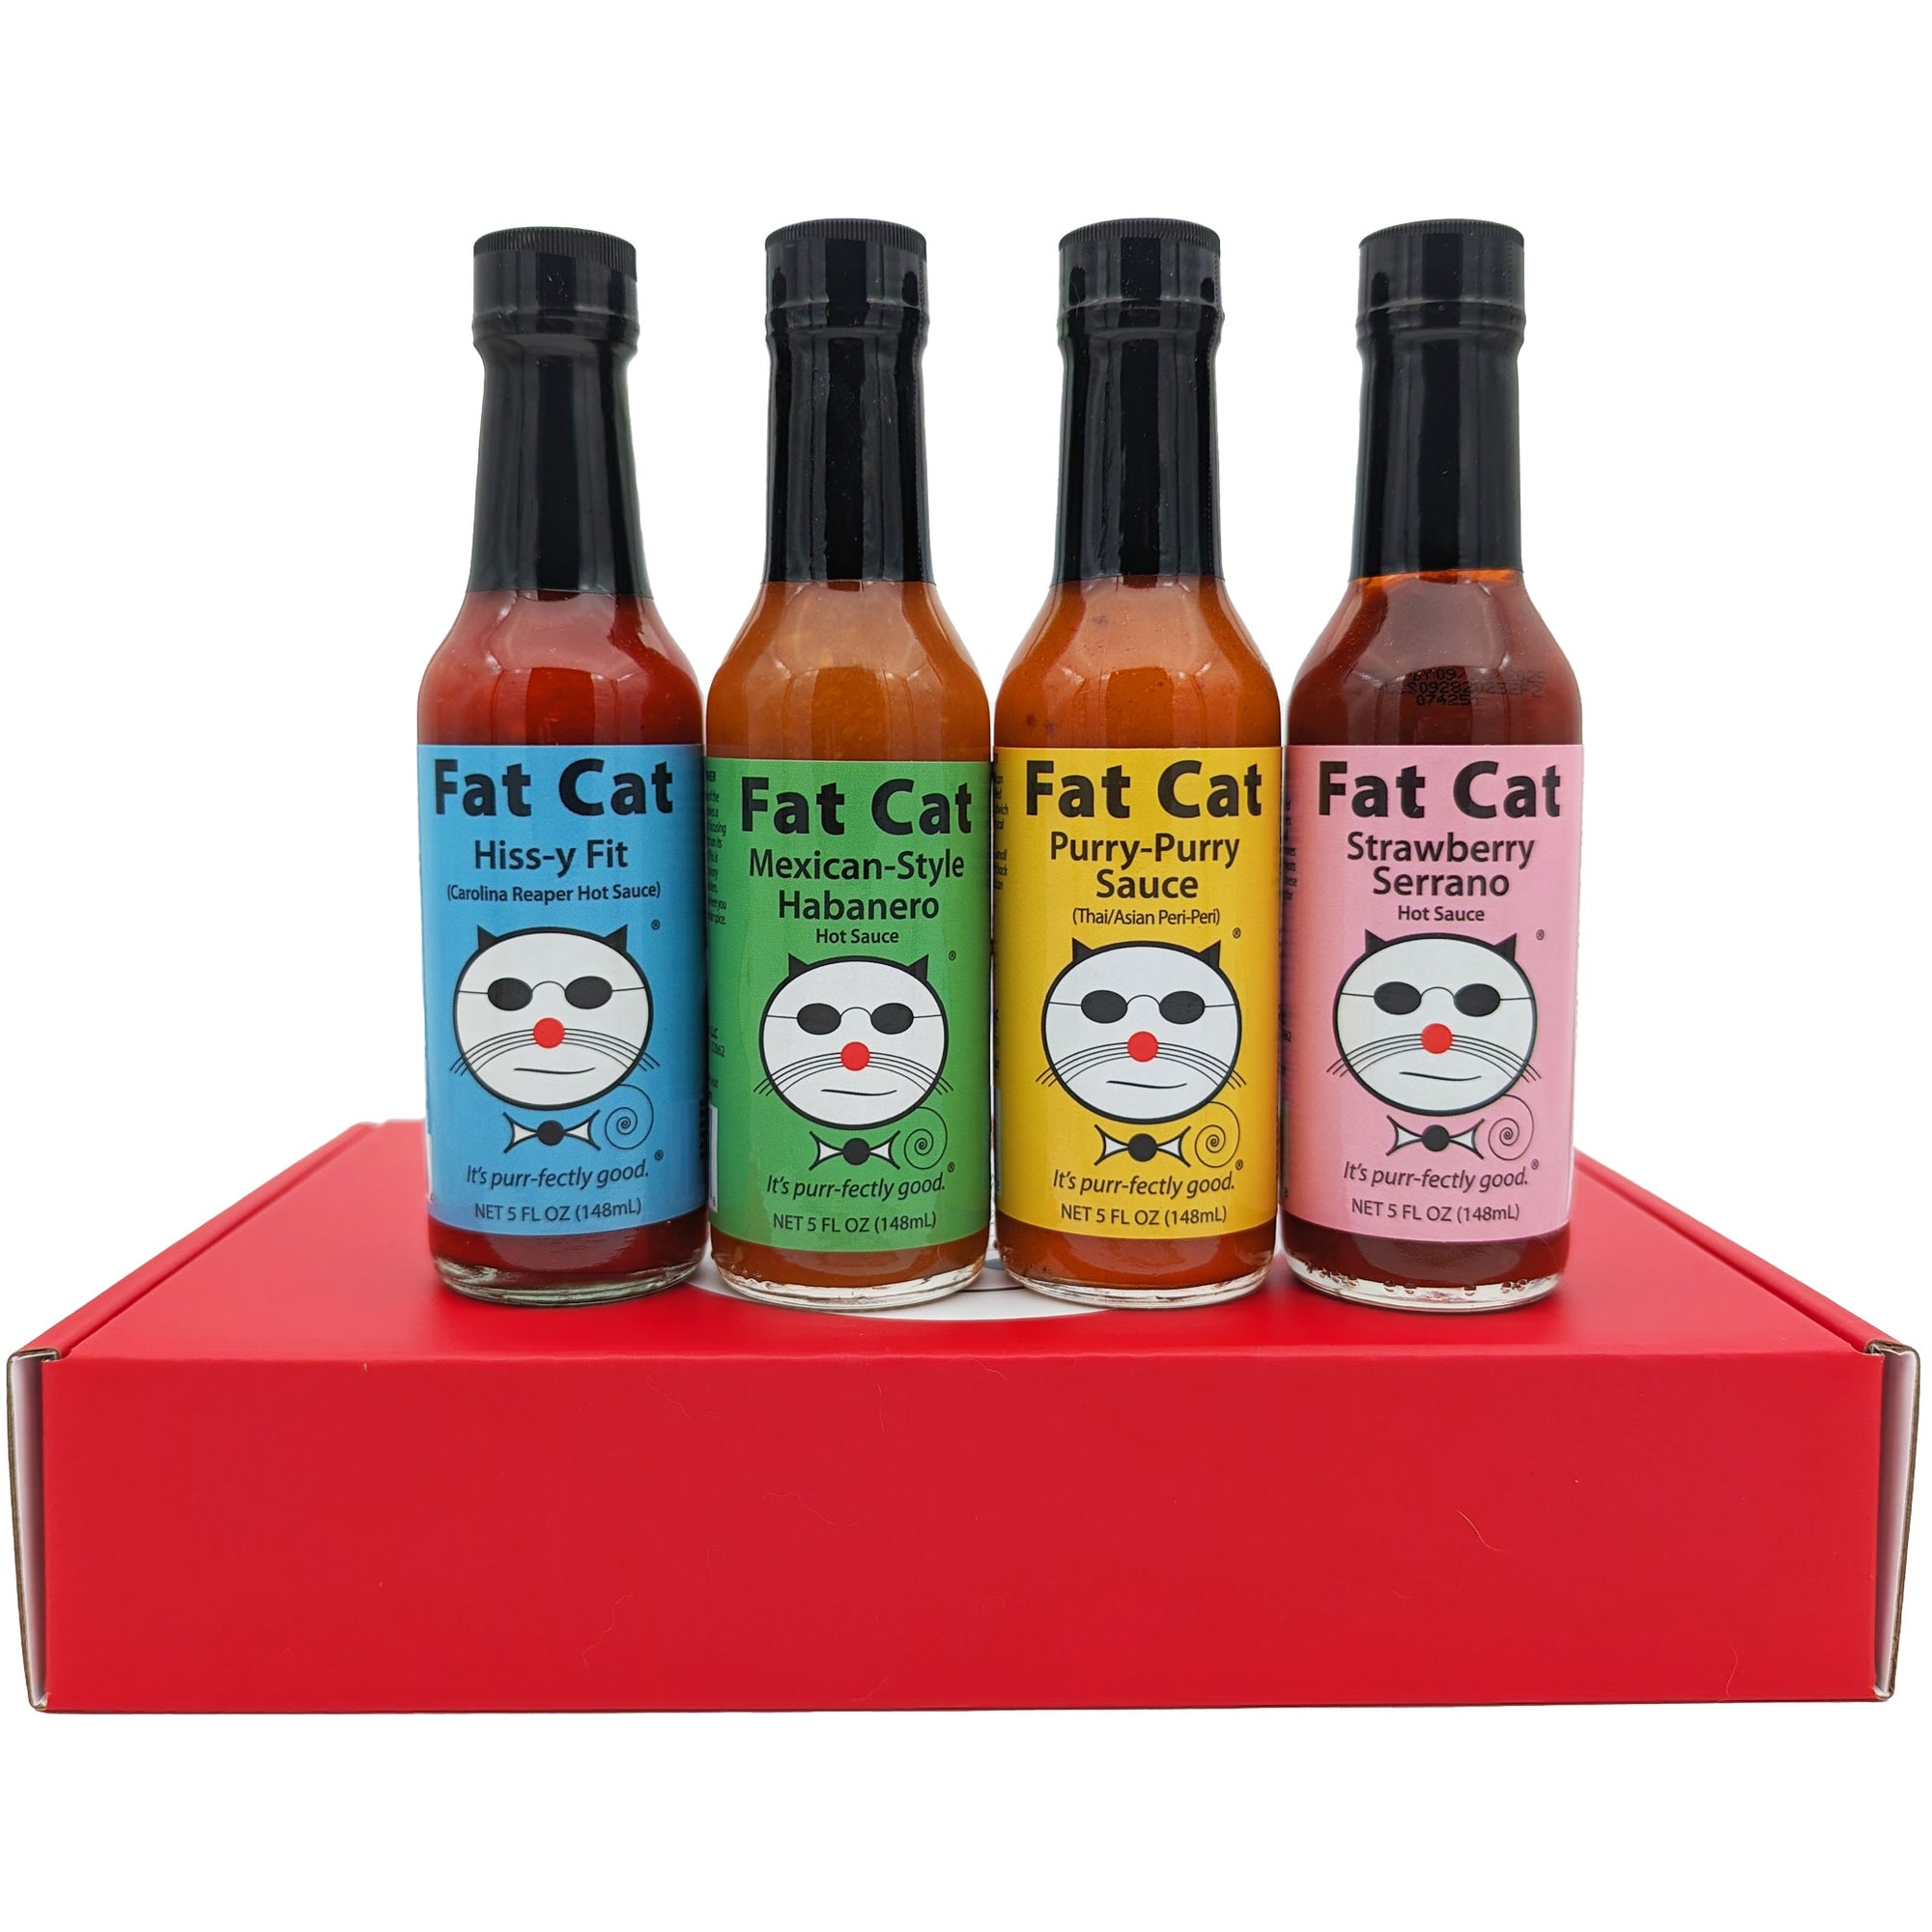 Create Your Own 4-Bottle Hot Sauce Gift Box